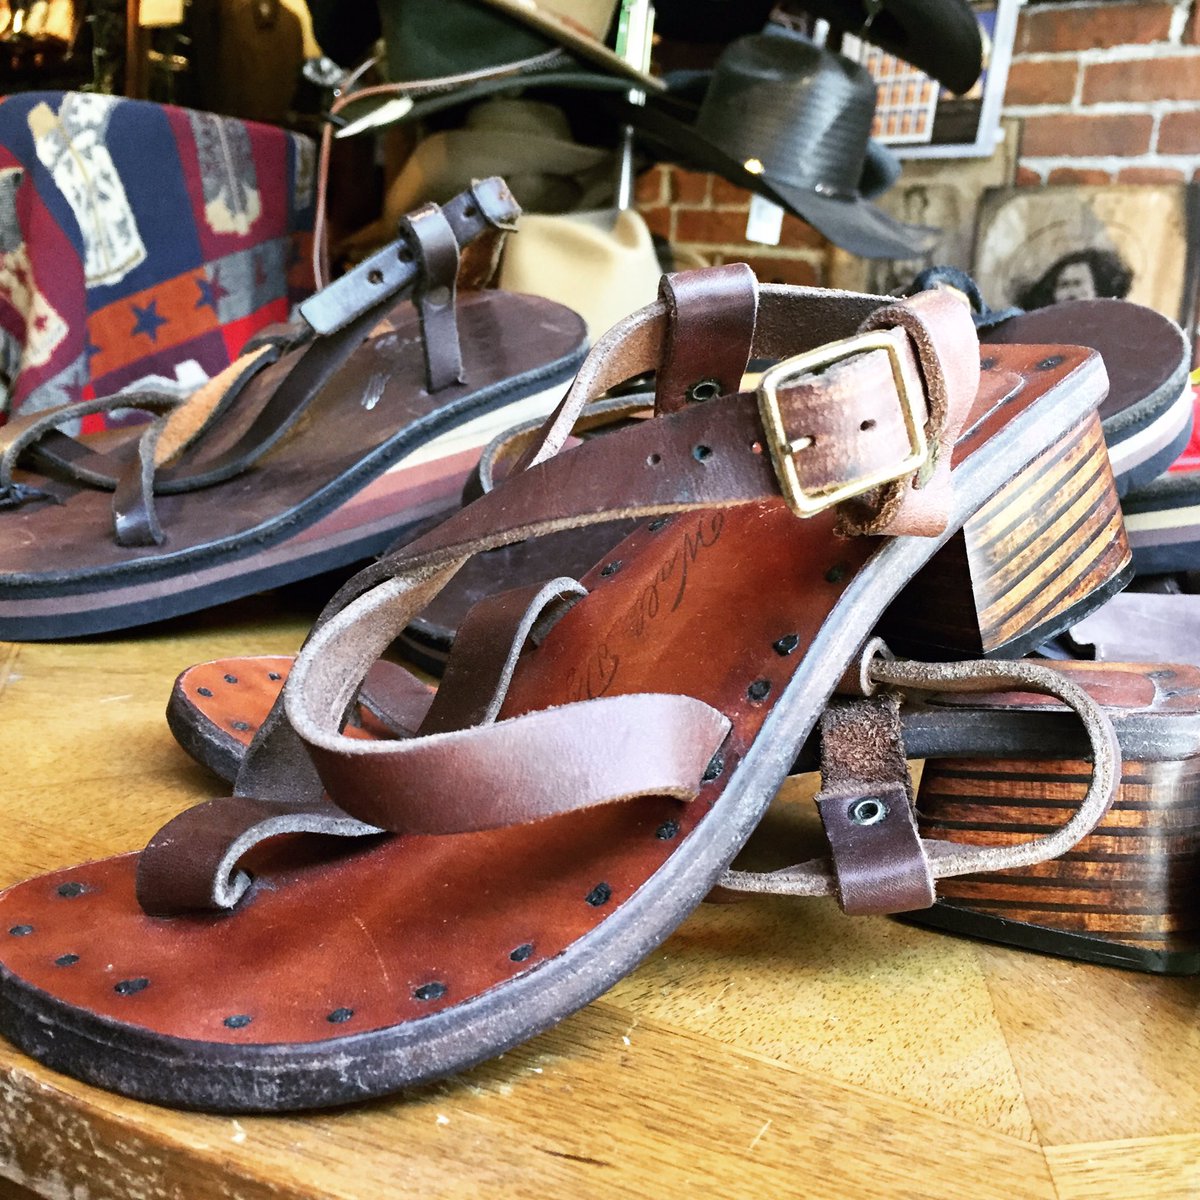 Vintage (never used) leather sandals are available at @helensleathershop!  These were handcrafted back in the '70s!
#vintage #leathersandals